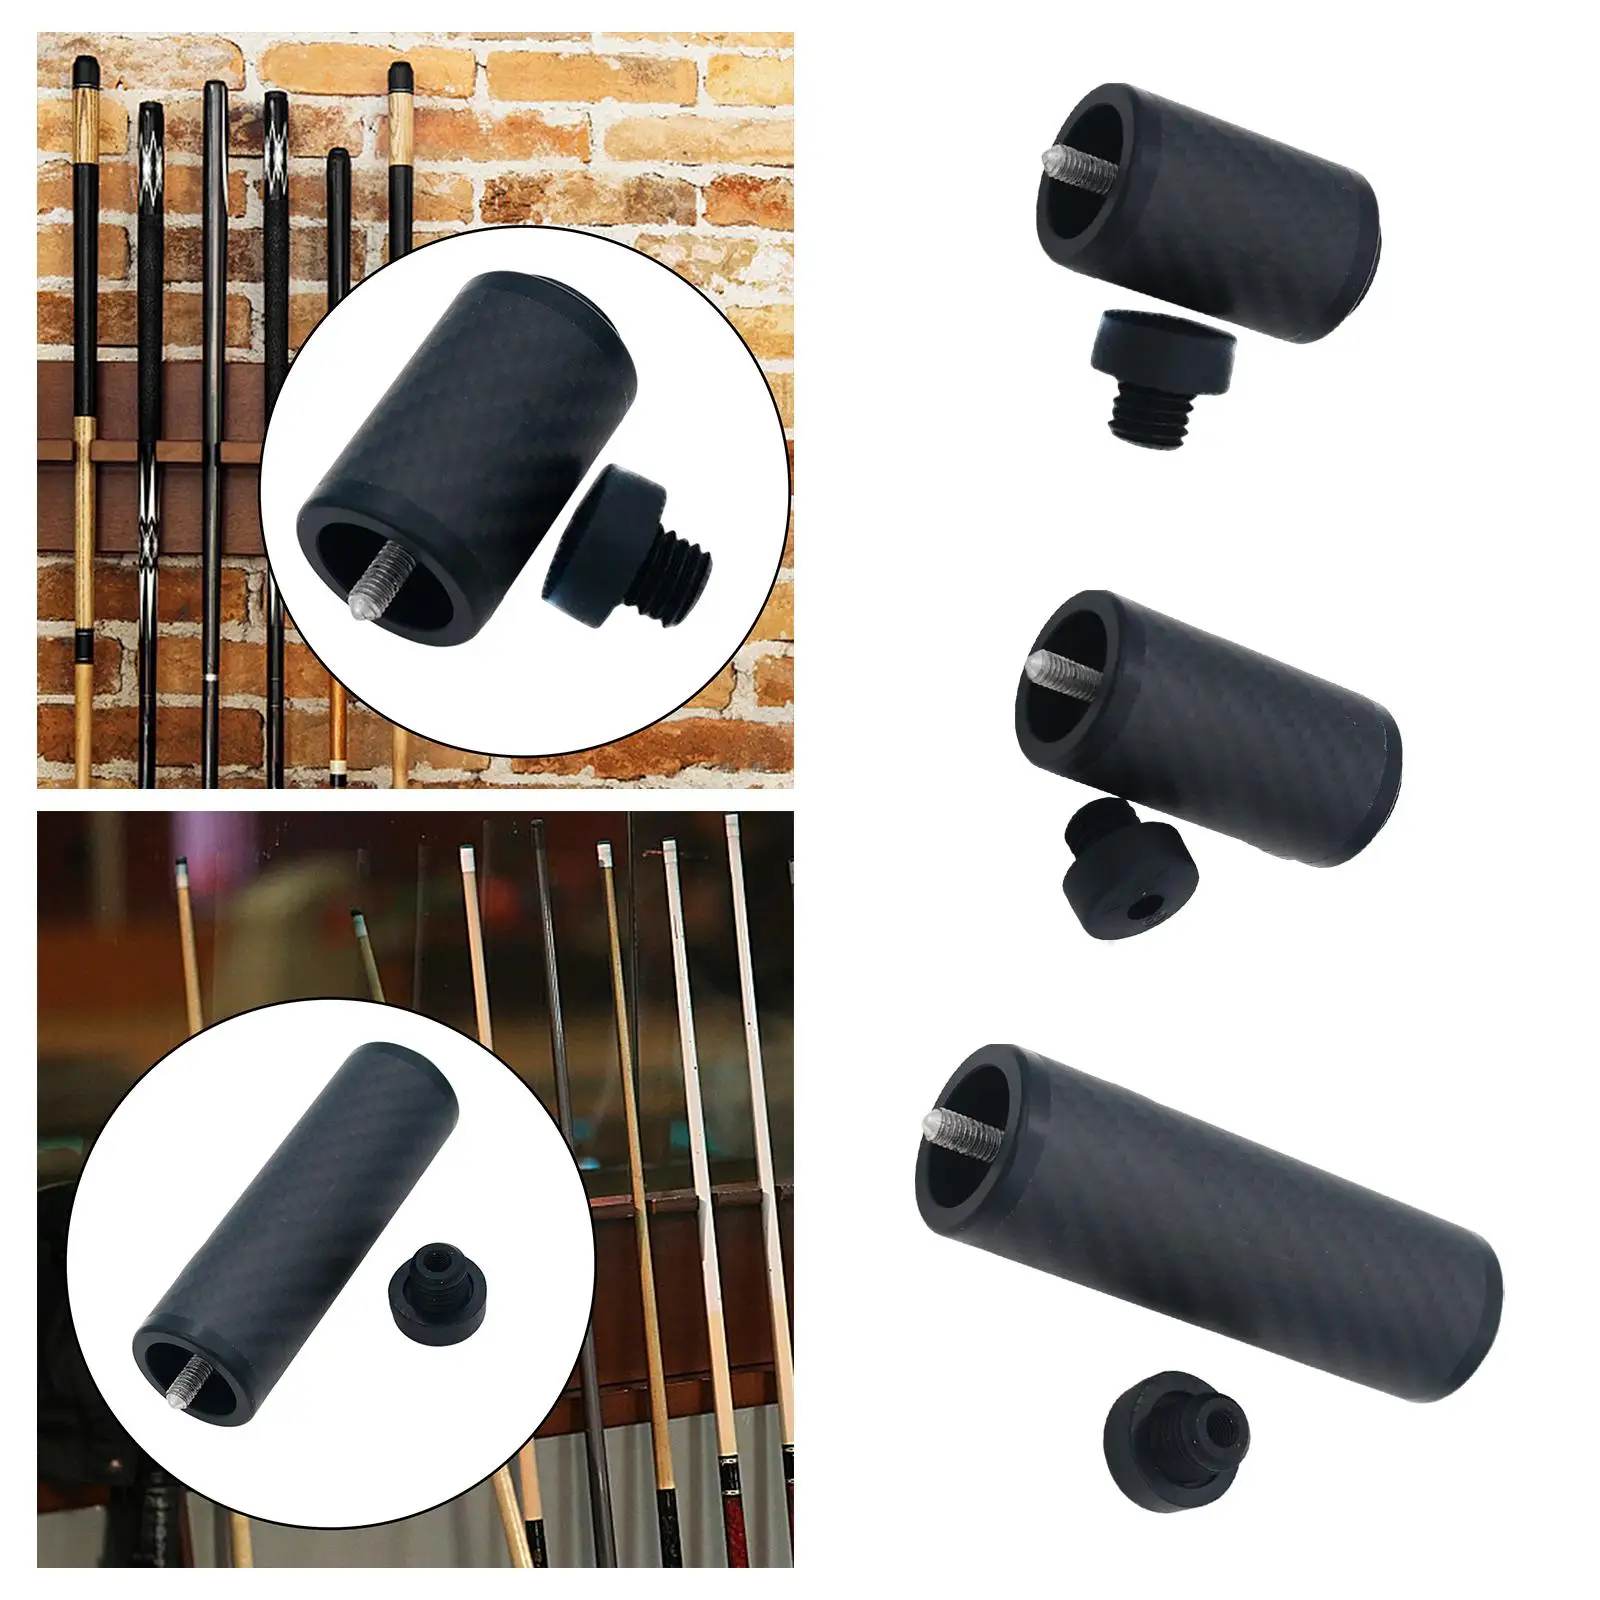 Billiards Pool Cue Extension Compact Cue Joint Accessories Snooker Pool Cue